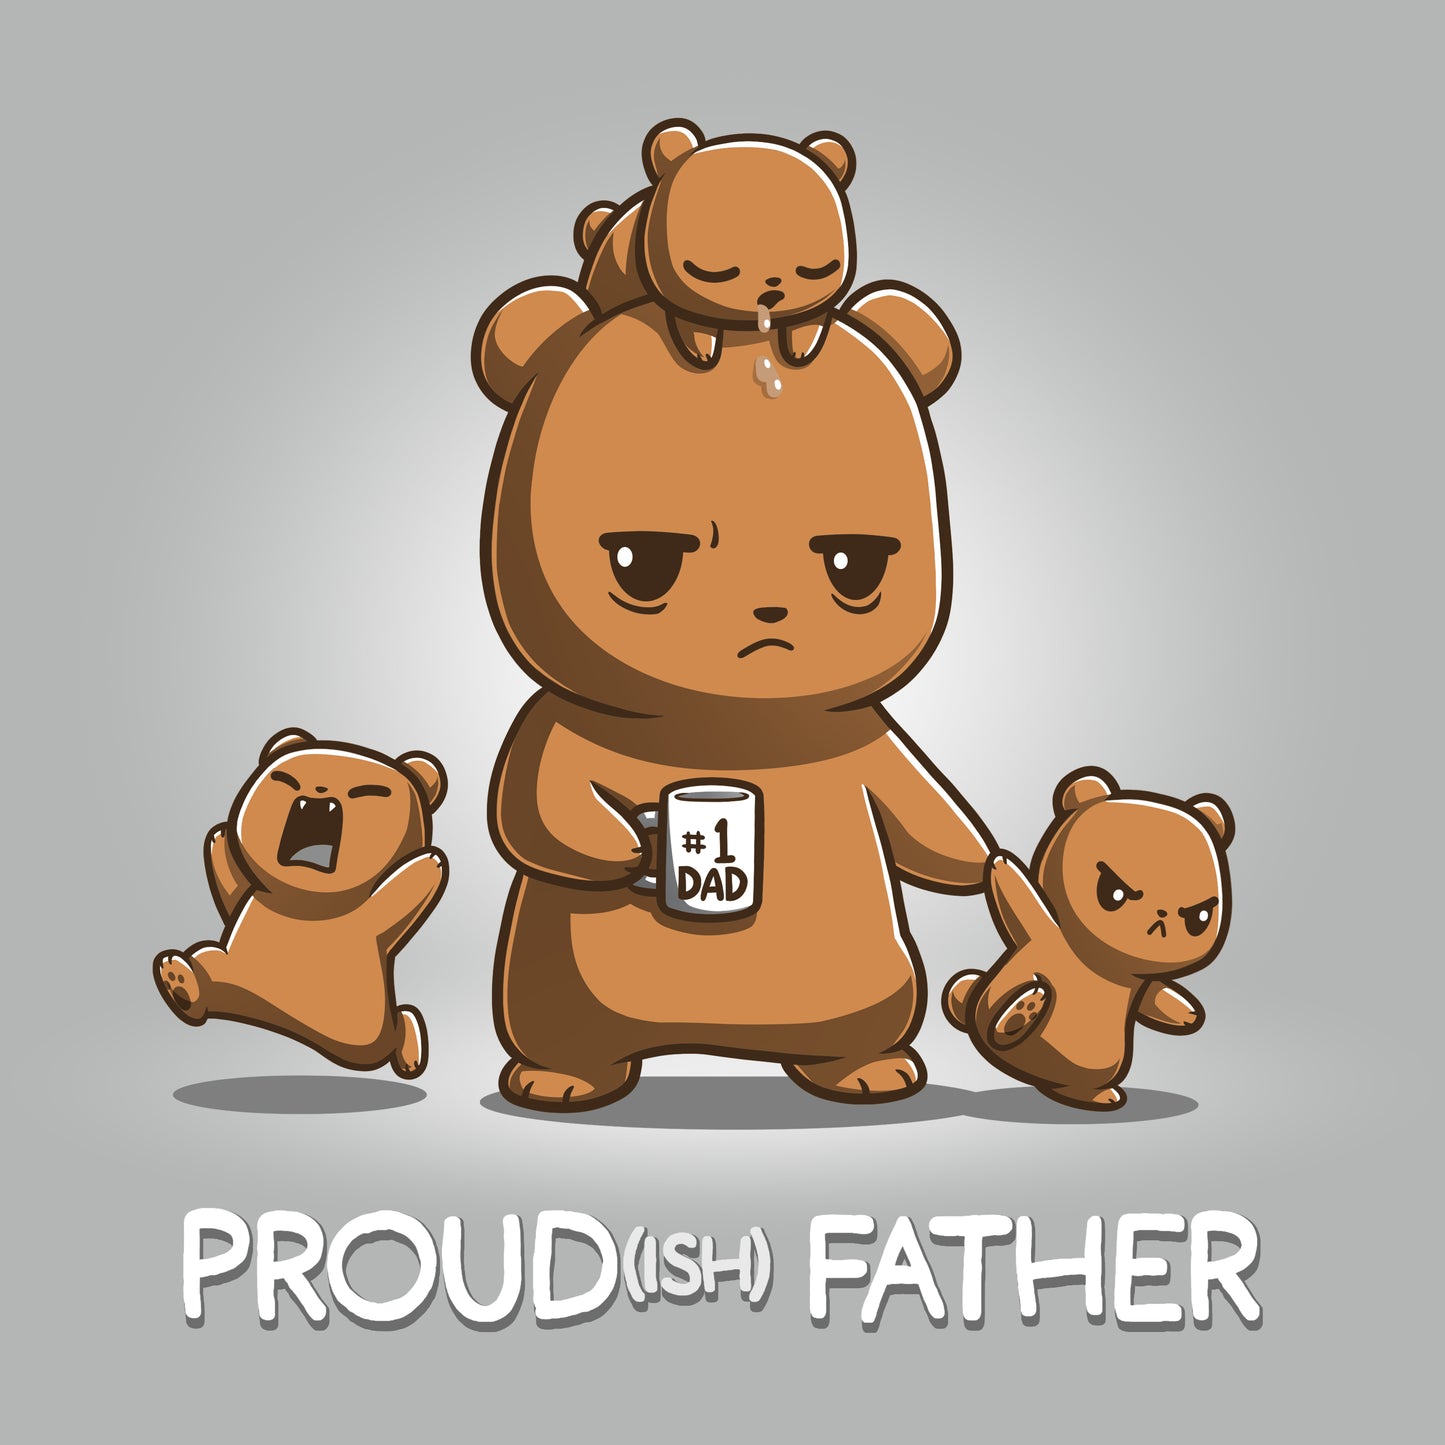 An illustration of a bear holding a "#1 Dad" mug with a baby bear on its head, one bear cub crying, and another bear cub pulling on its leg. The text "PROUD(ISH) FATHER" is at the bottom, making this Proud(ish) Father T-shirt made by monsterdigital from super soft ringspun cotton perfect for any dad's wardrobe.